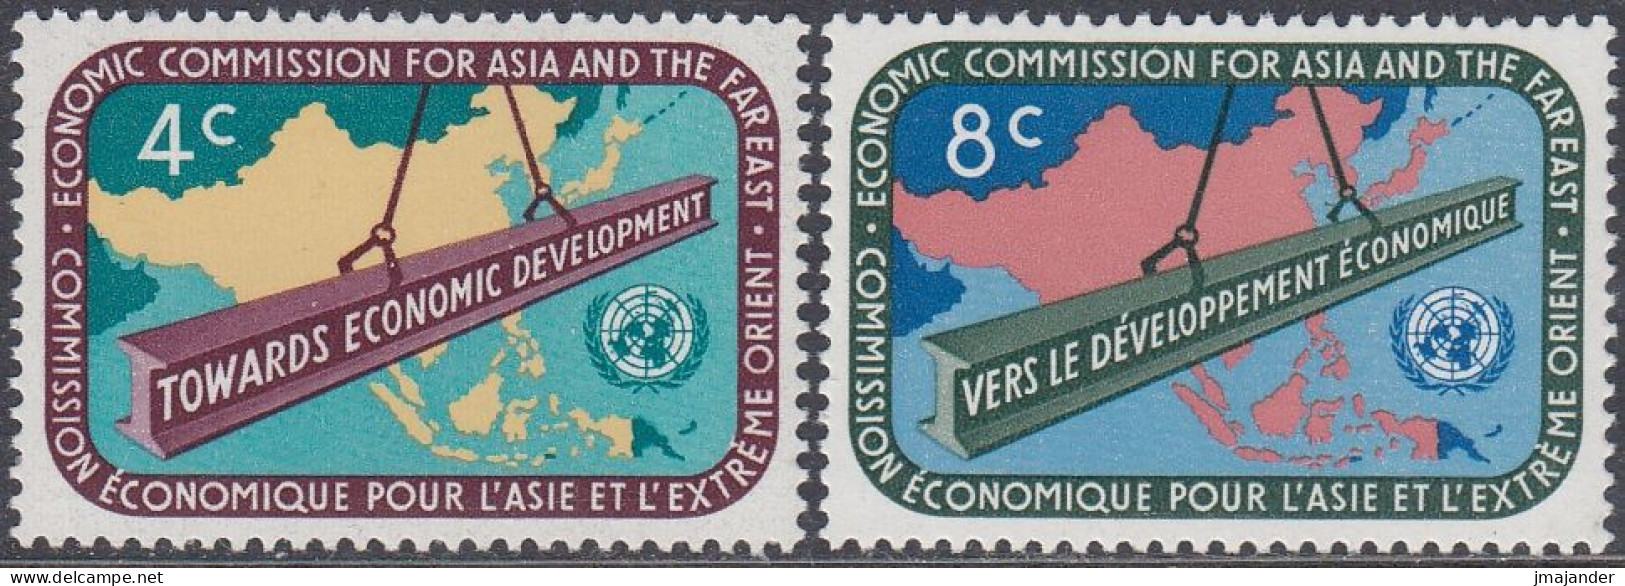 UN New York 1960 - U.N. Economic Commission For Asia And The Far East Or "ECAFE" - Mi 86-87 ** MNH - Unused Stamps